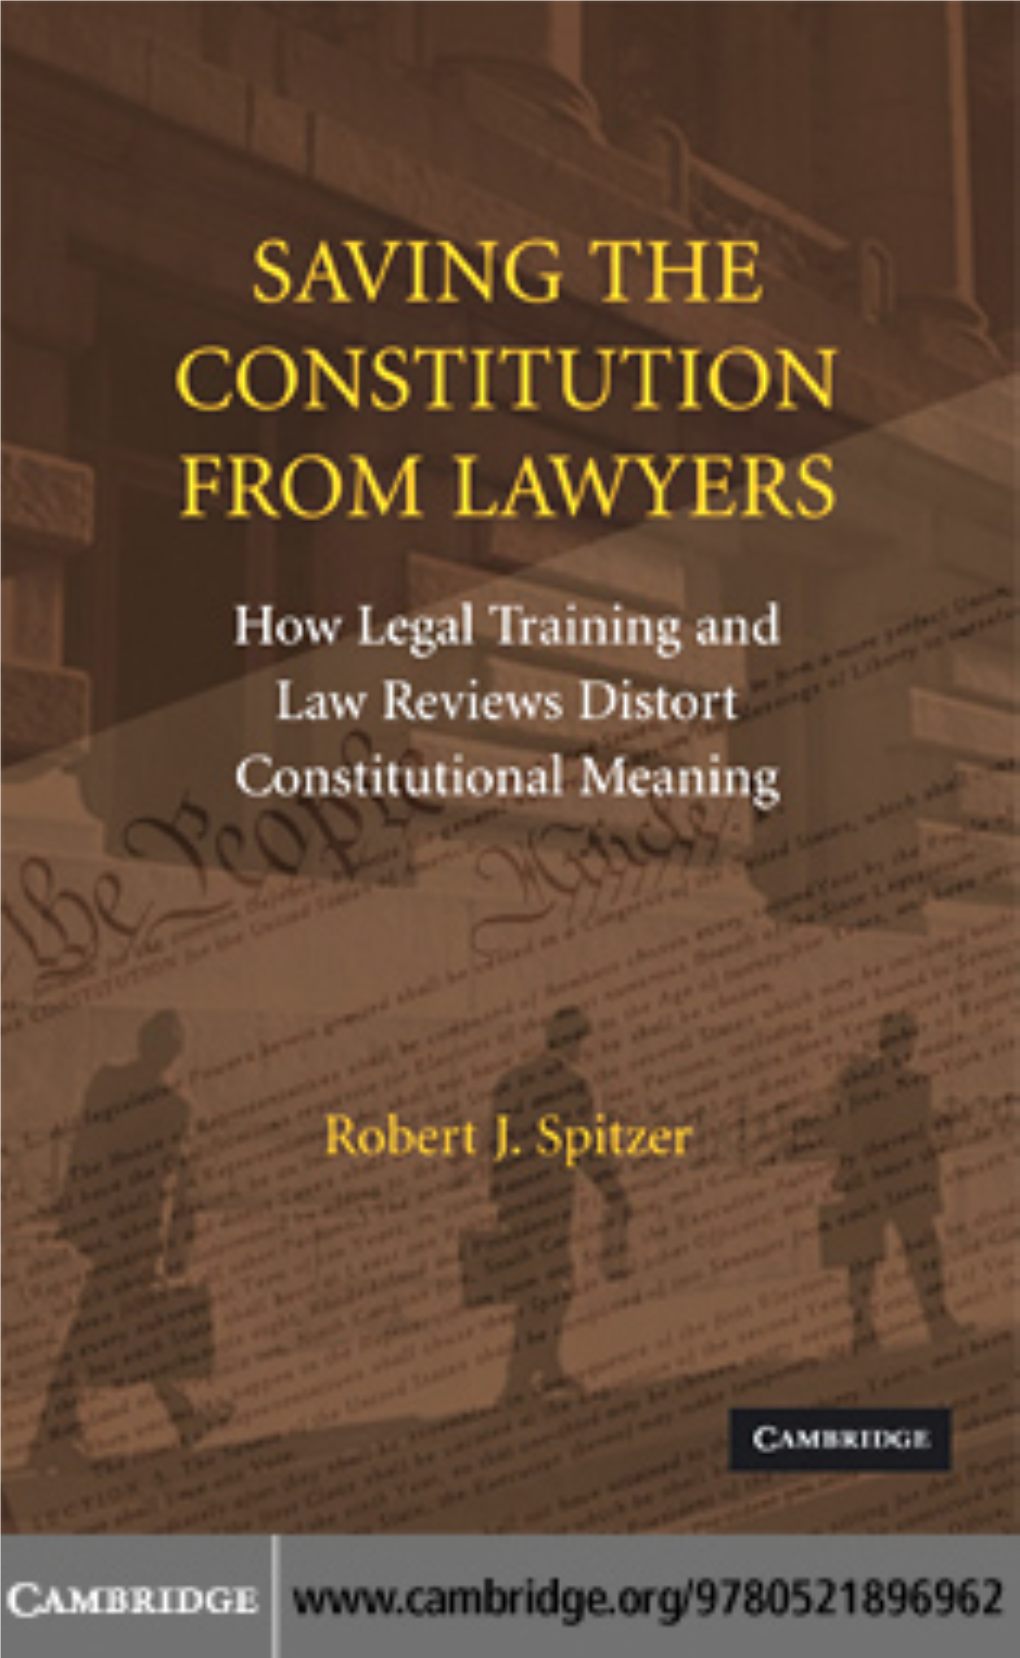 Saving the Constitution from Lawyers